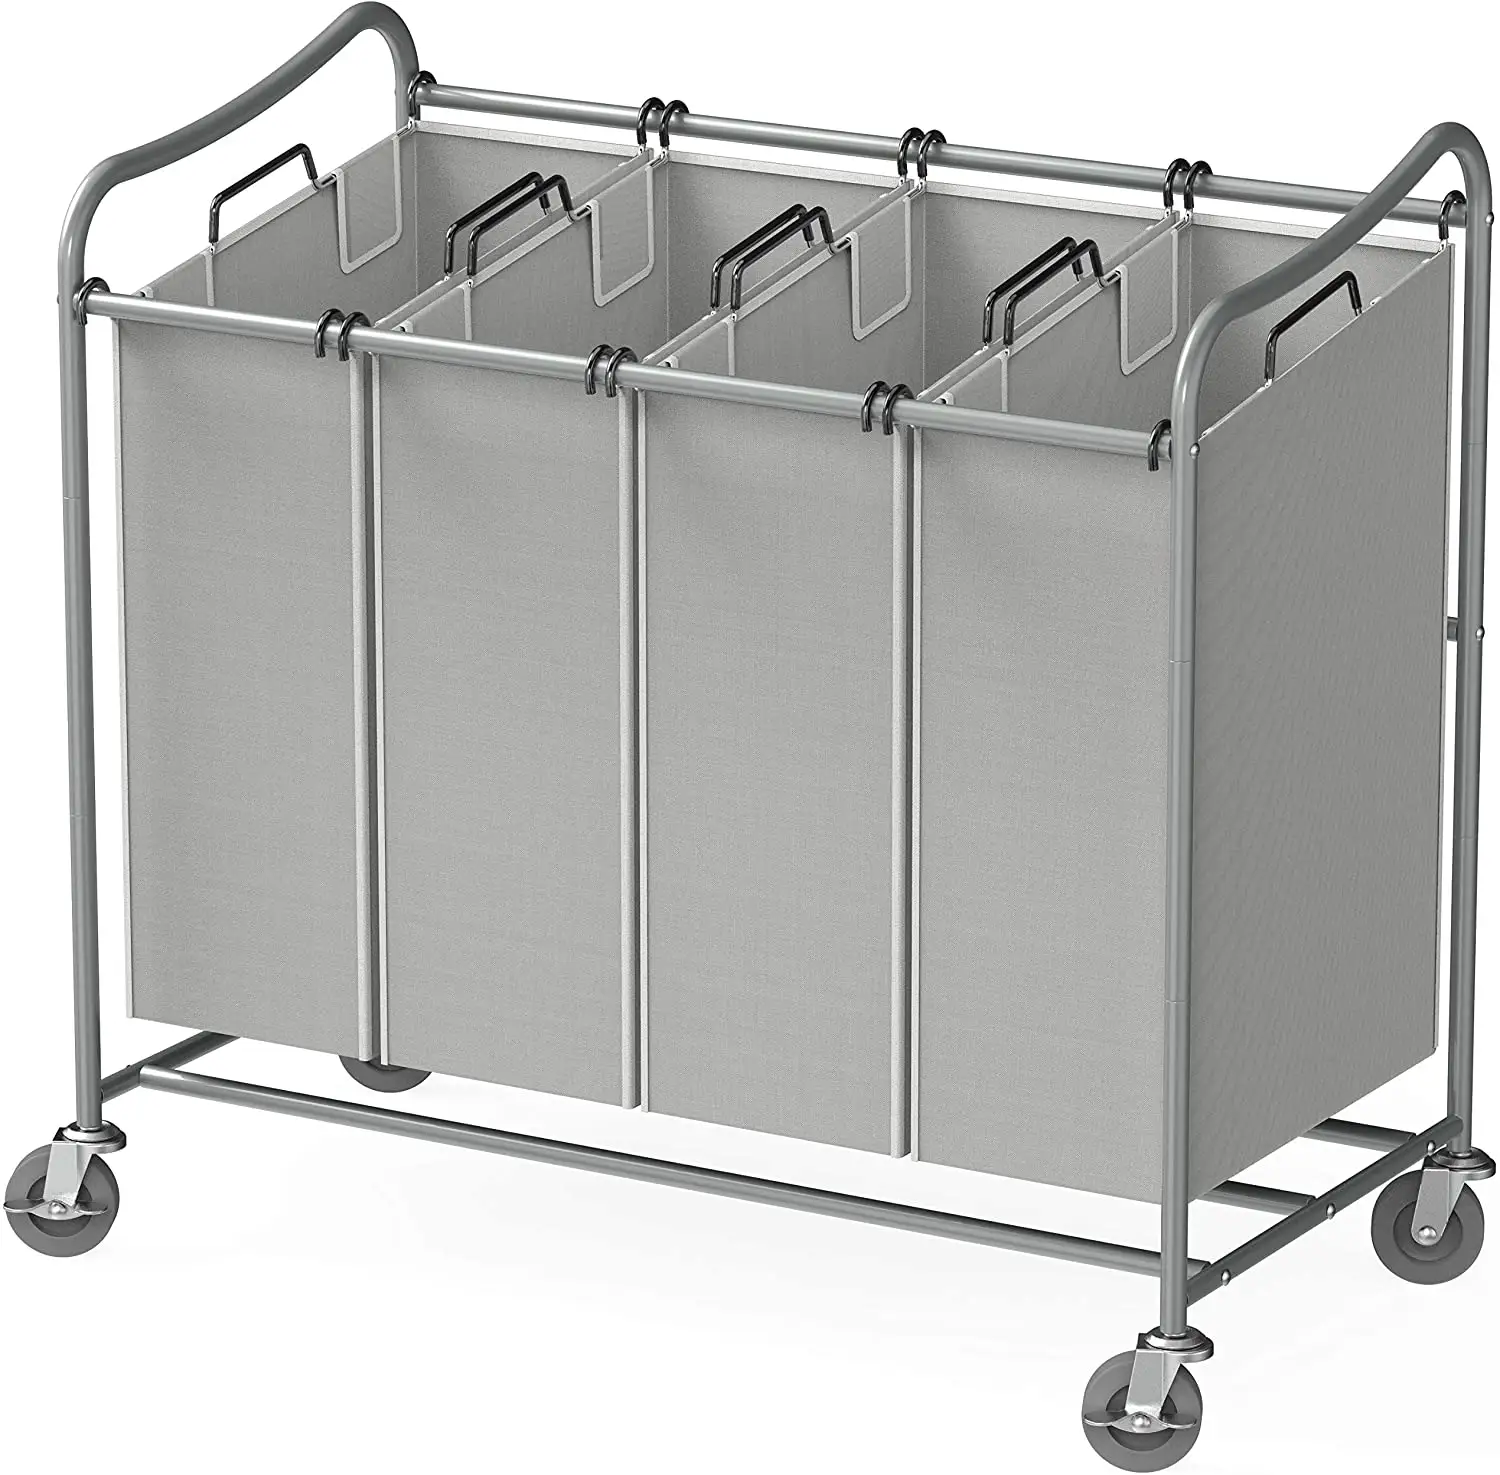 Heavy Duty Laundry Sorter Rolling Cart Rolling Laundry Basket Cart with 4 Removable Bags Laundry Organizer Cart Storage